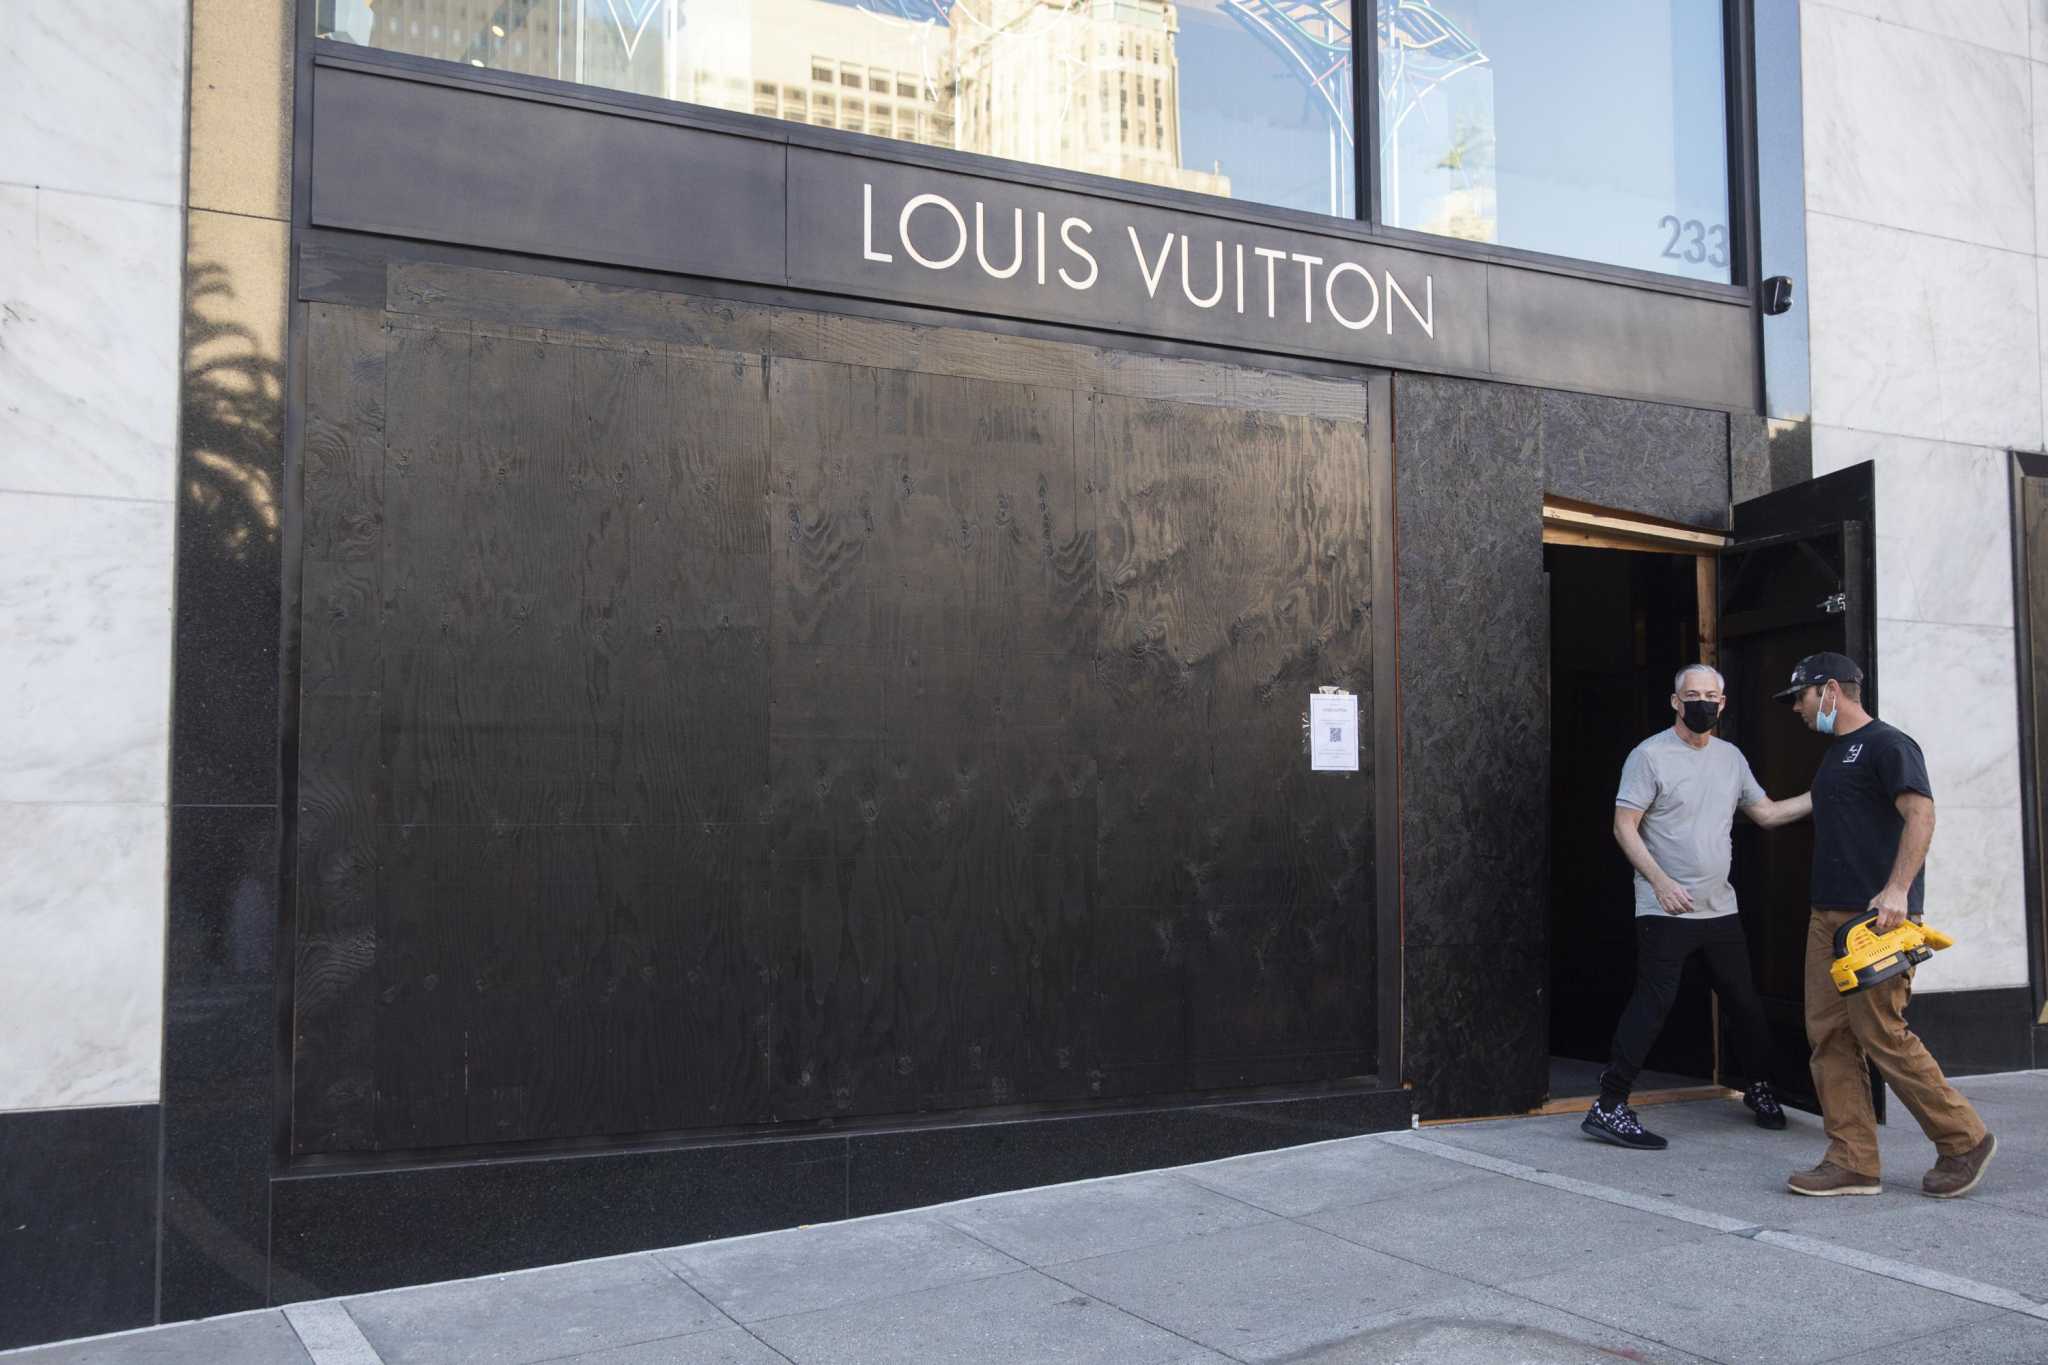 Old video of people looting a Louis Vuitton store in U.S. linked